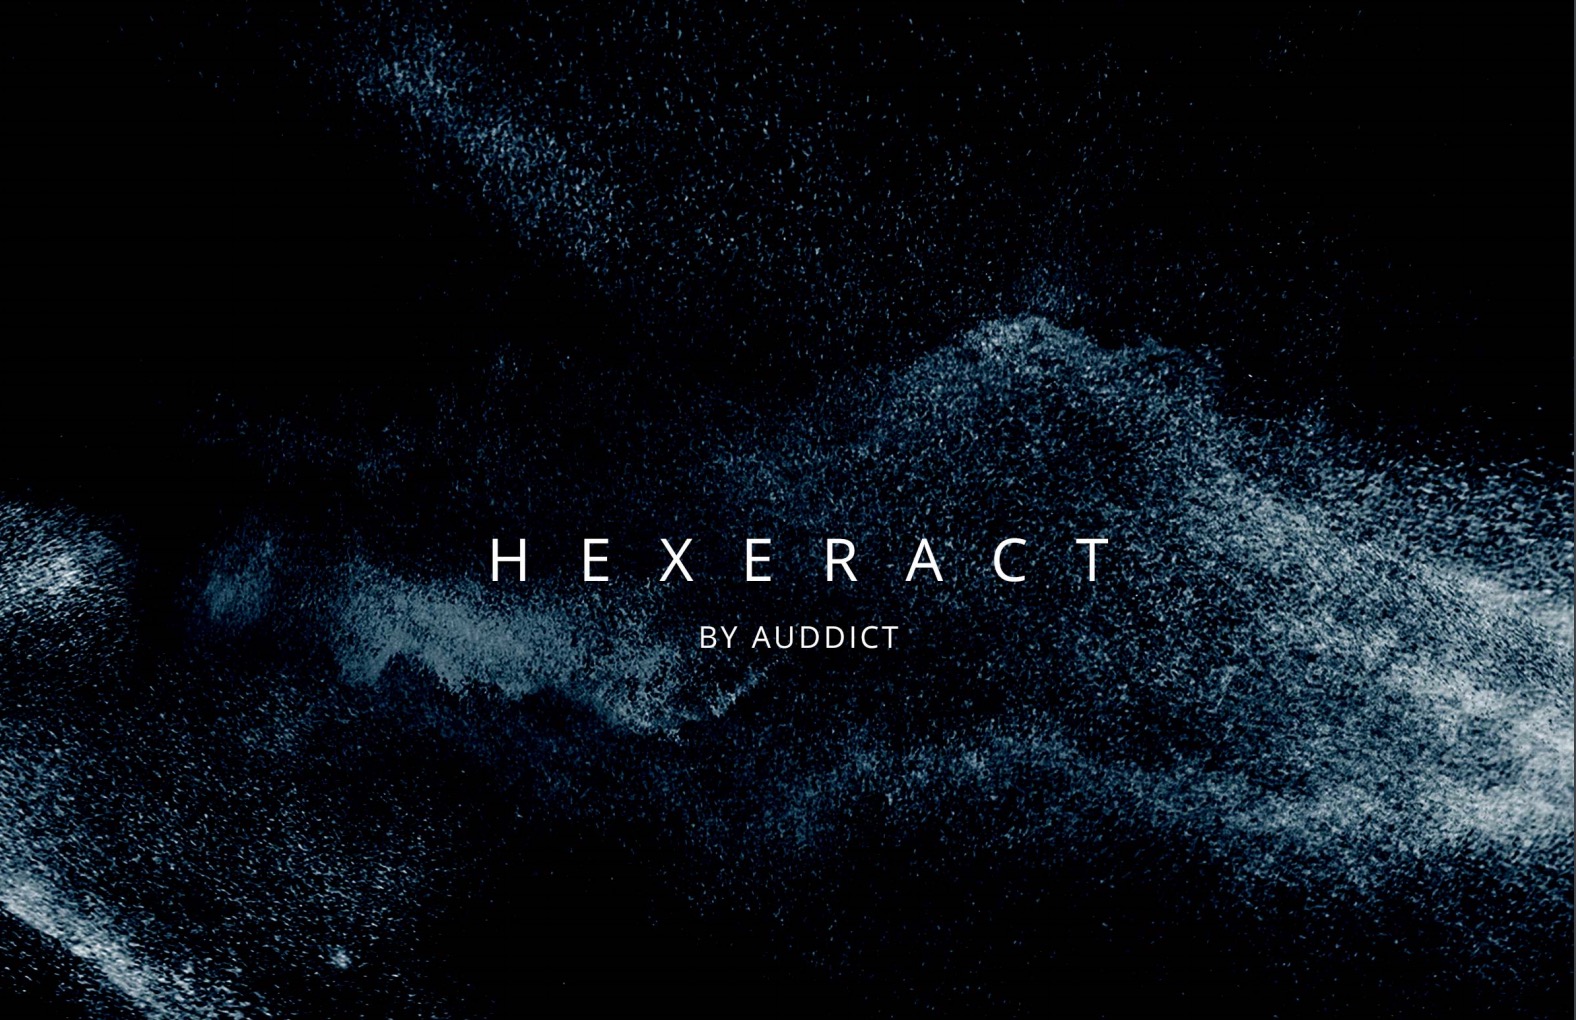 HEXERACT Review by Auddict